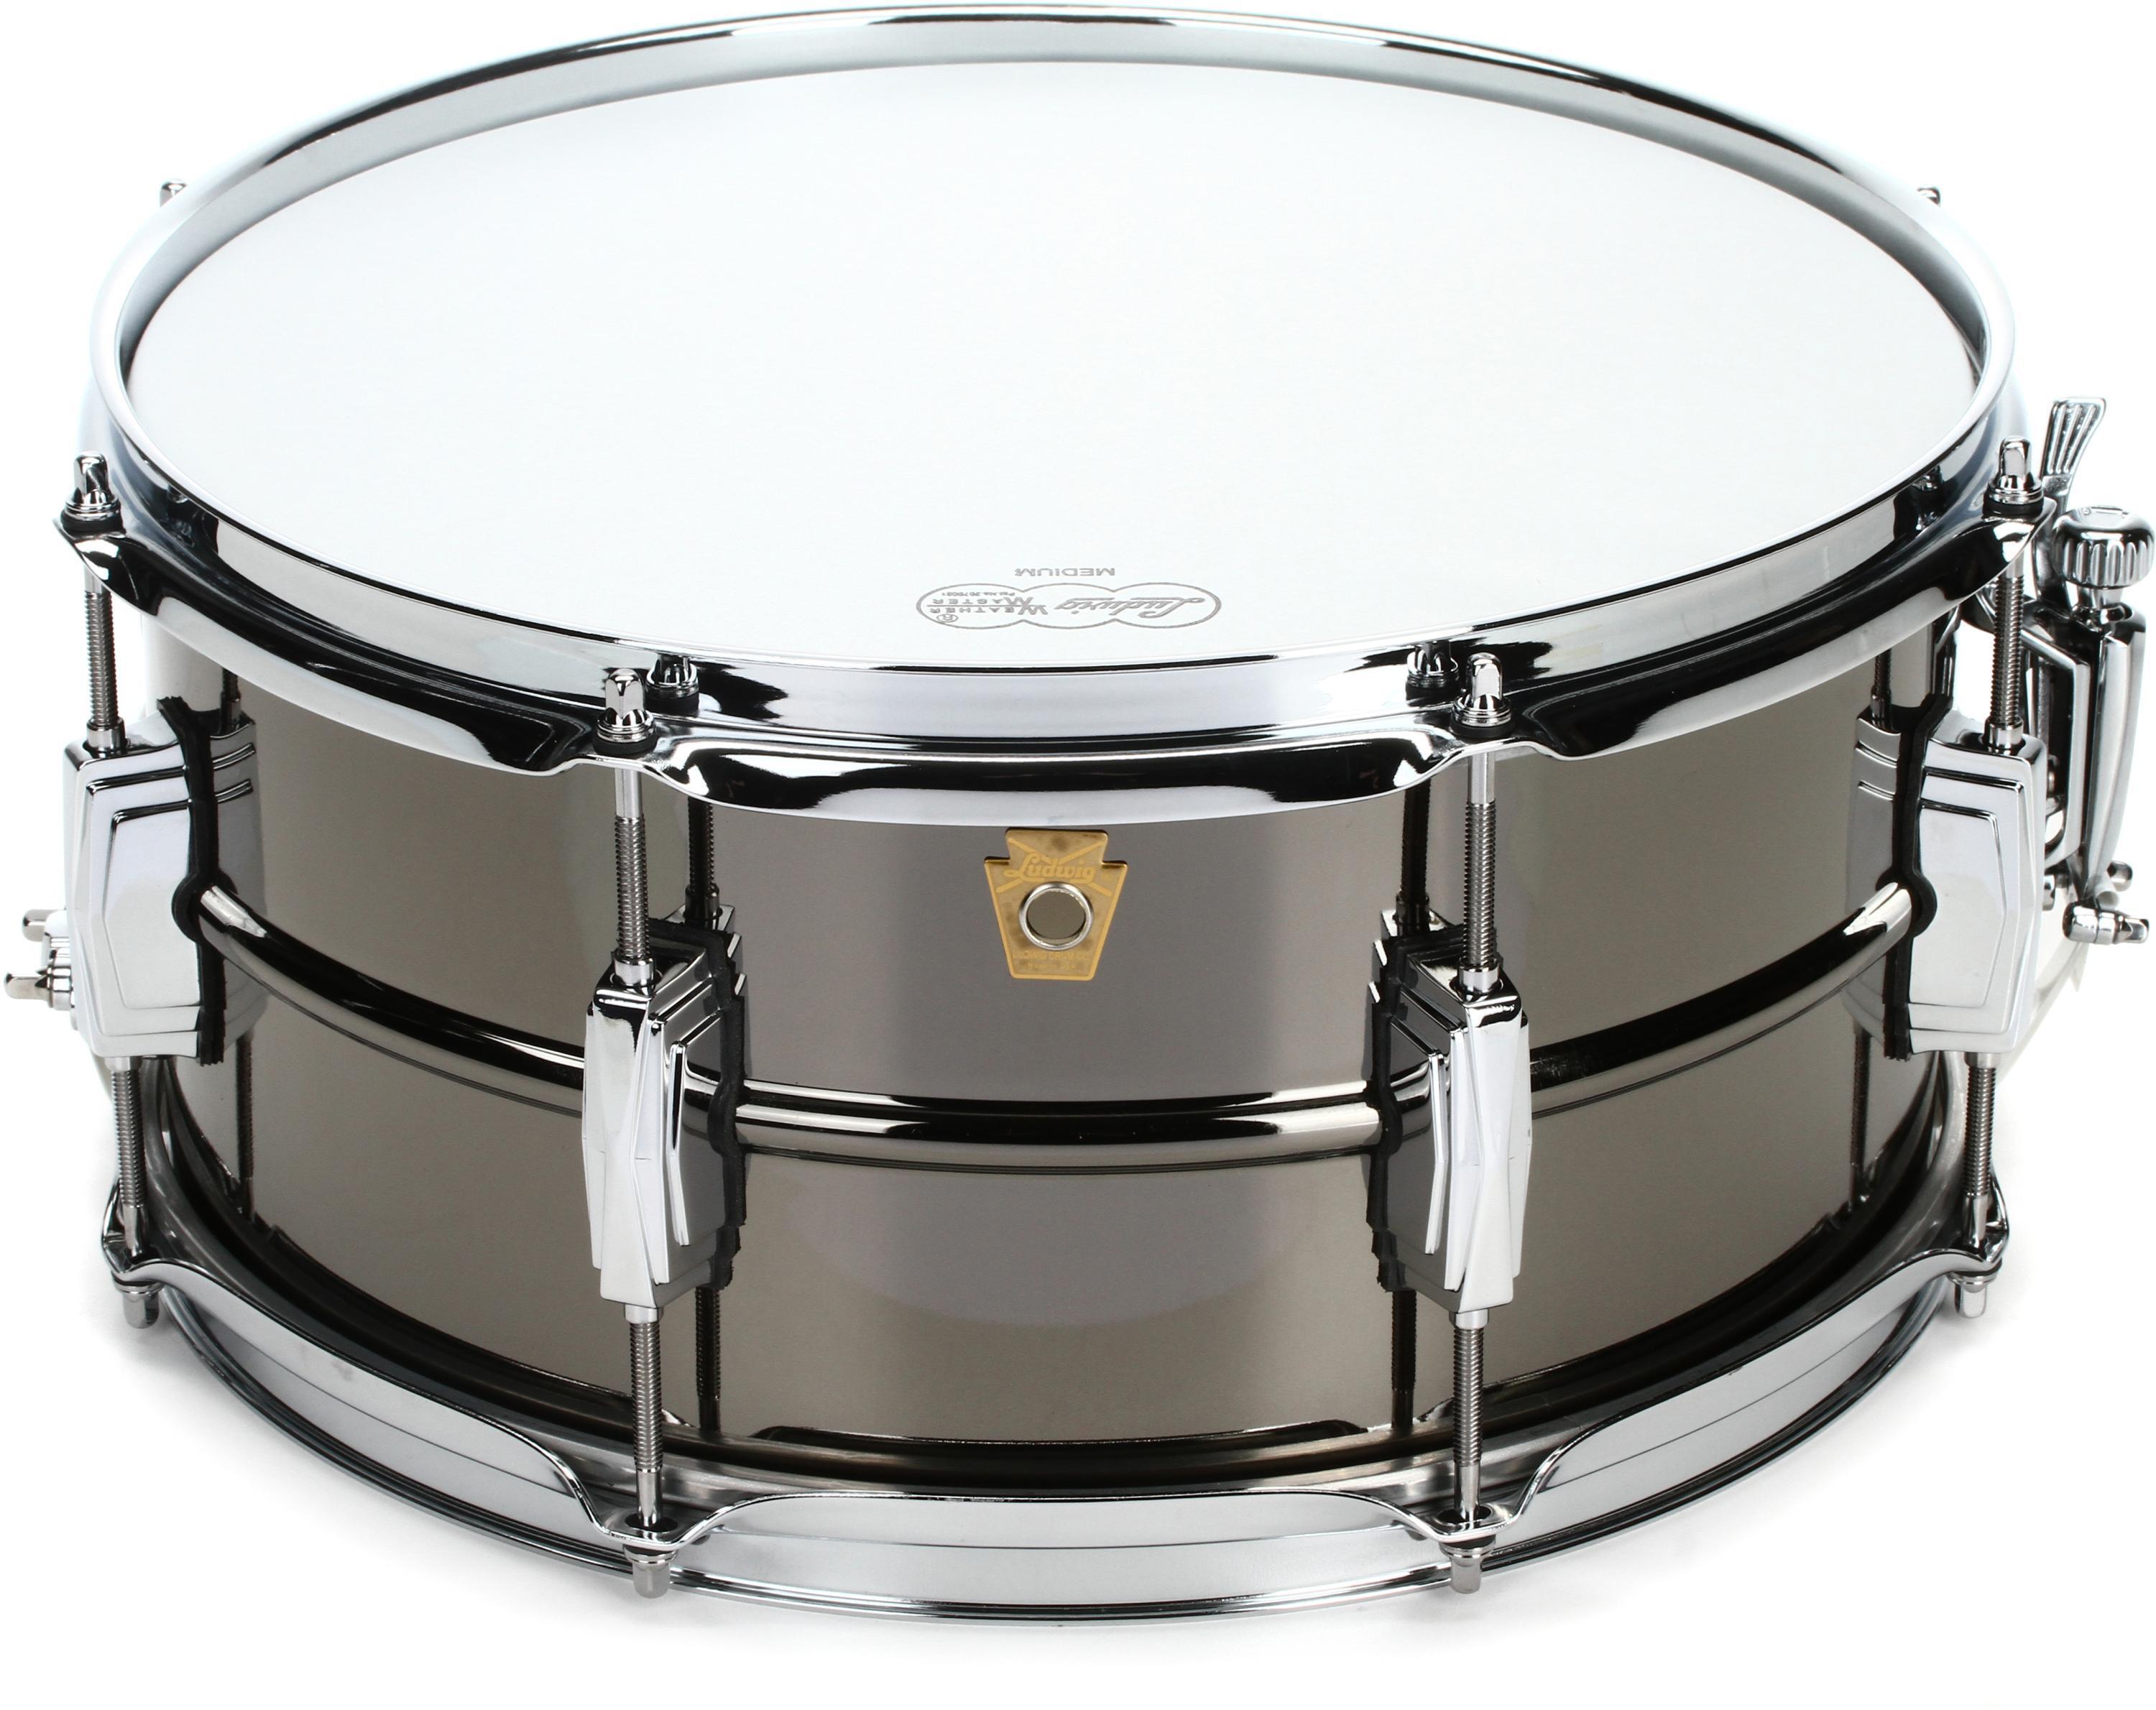 Ludwig Black Beauty Snare Drum - 6.5 x 14-inch - Black Nickel with 8-Lugs